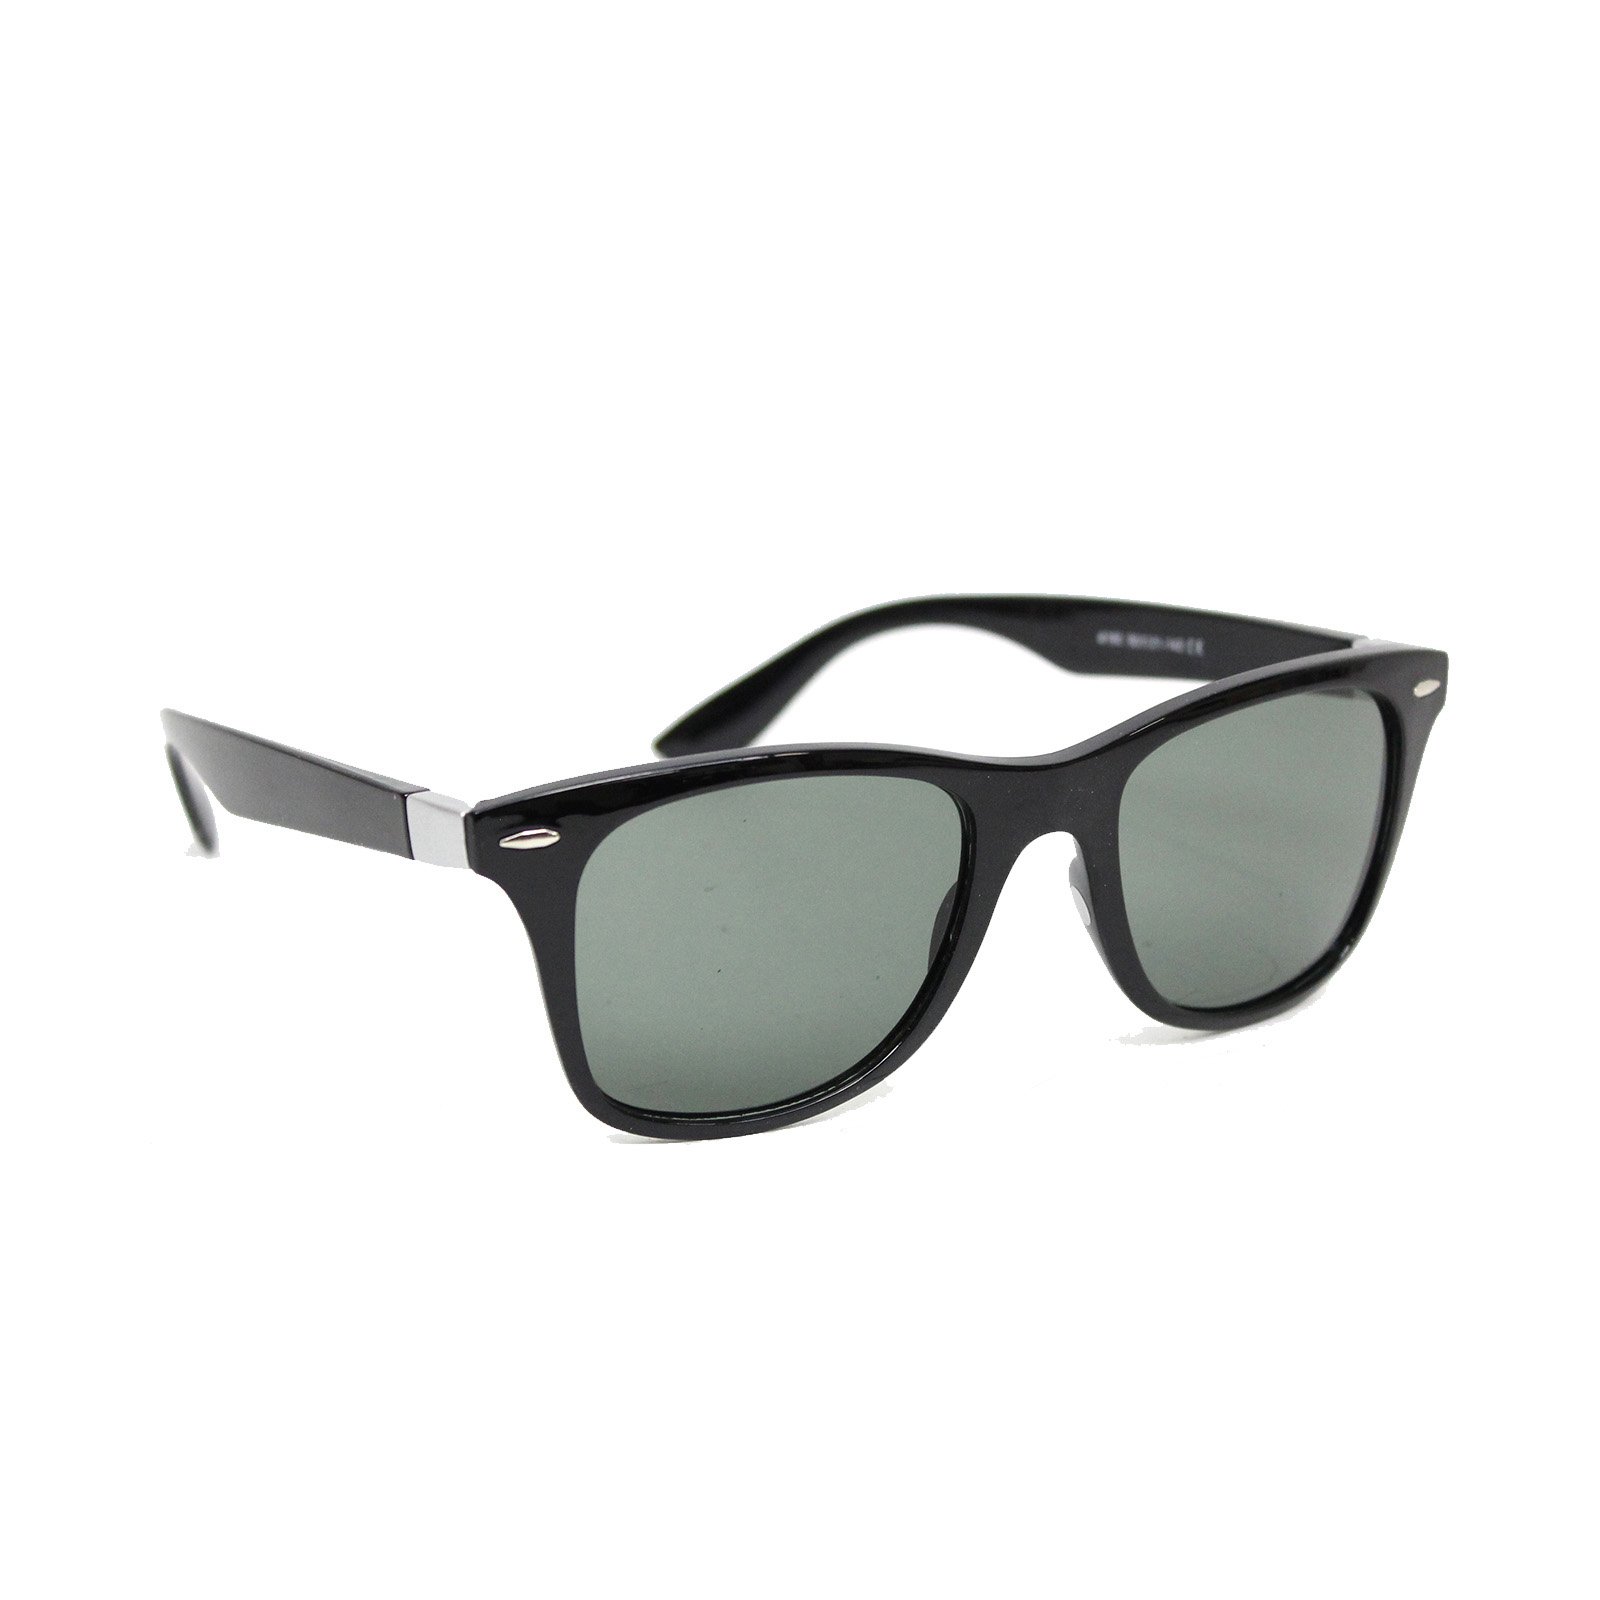 Model 4195 Sunglasses - Look Fantastic and Protect your Eyes with our ...